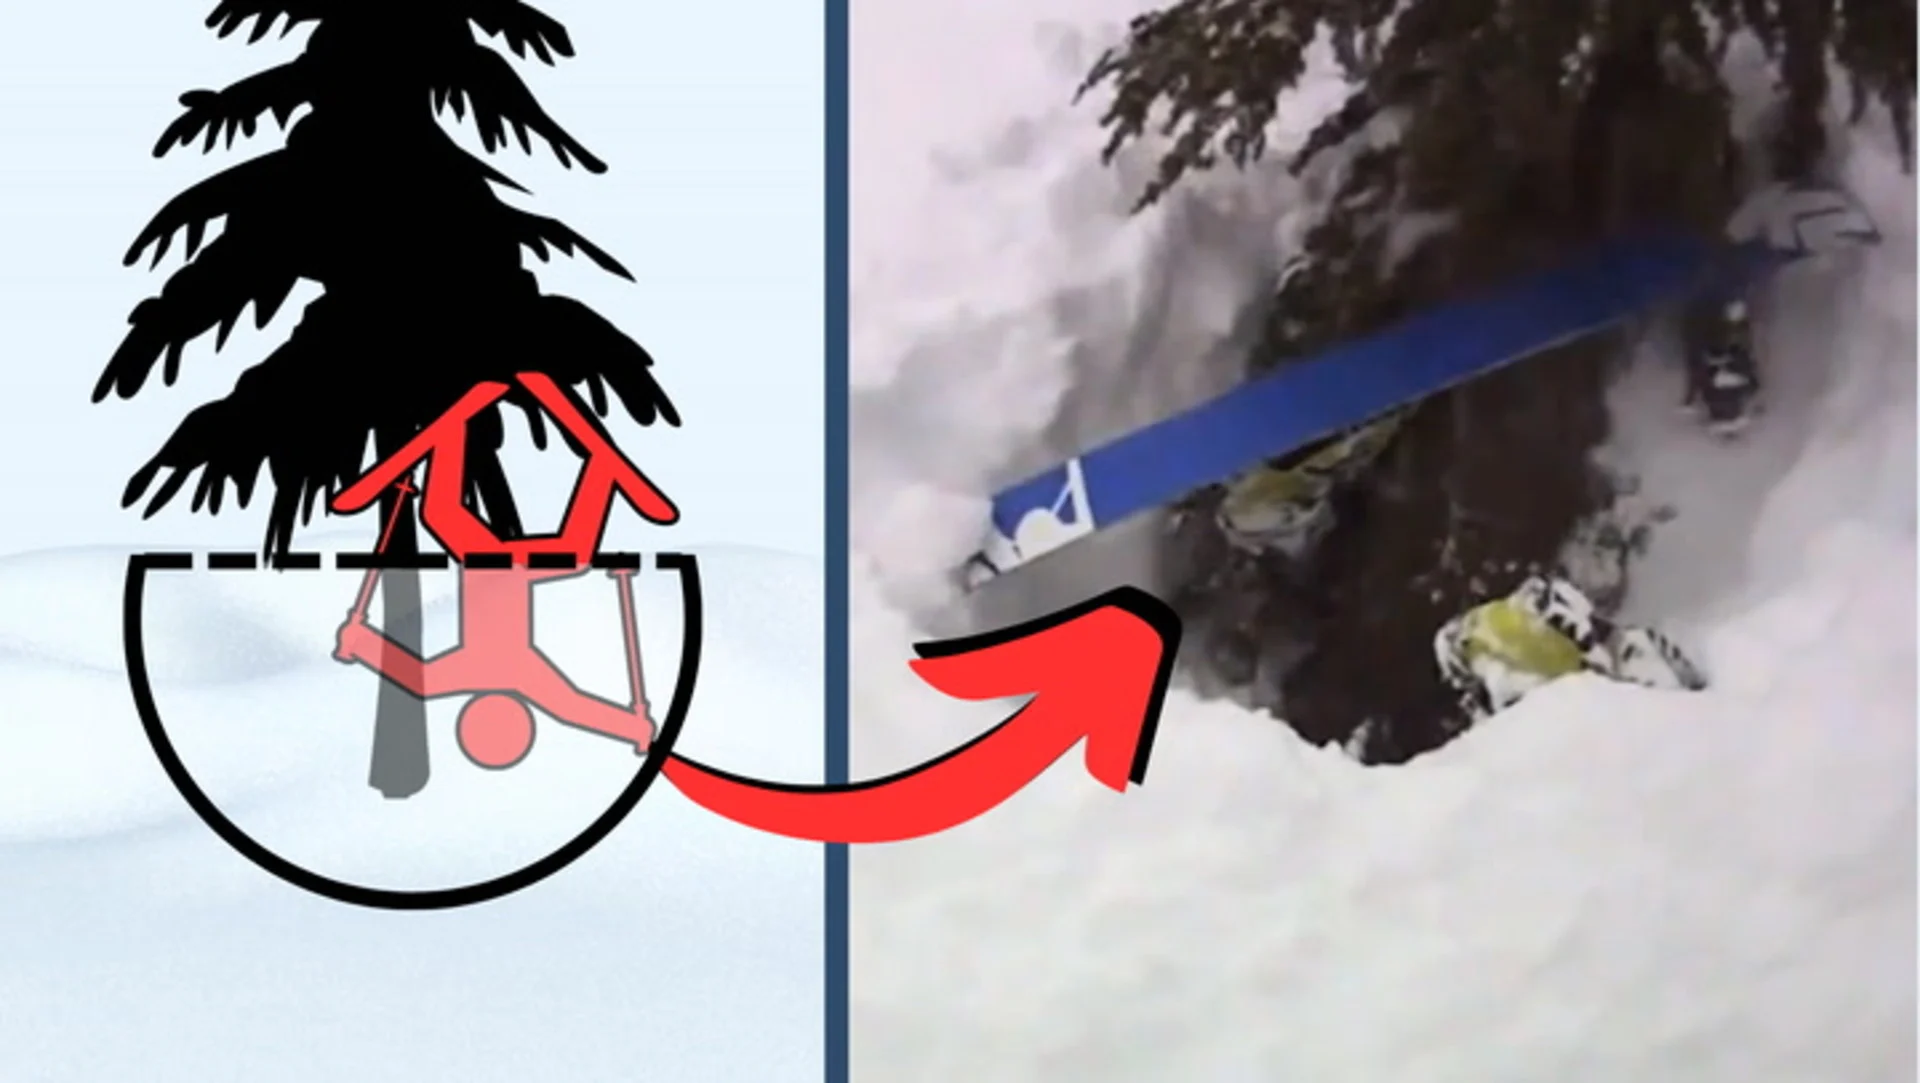 Do not underestimate the hidden dangers of tree wells on the slopes